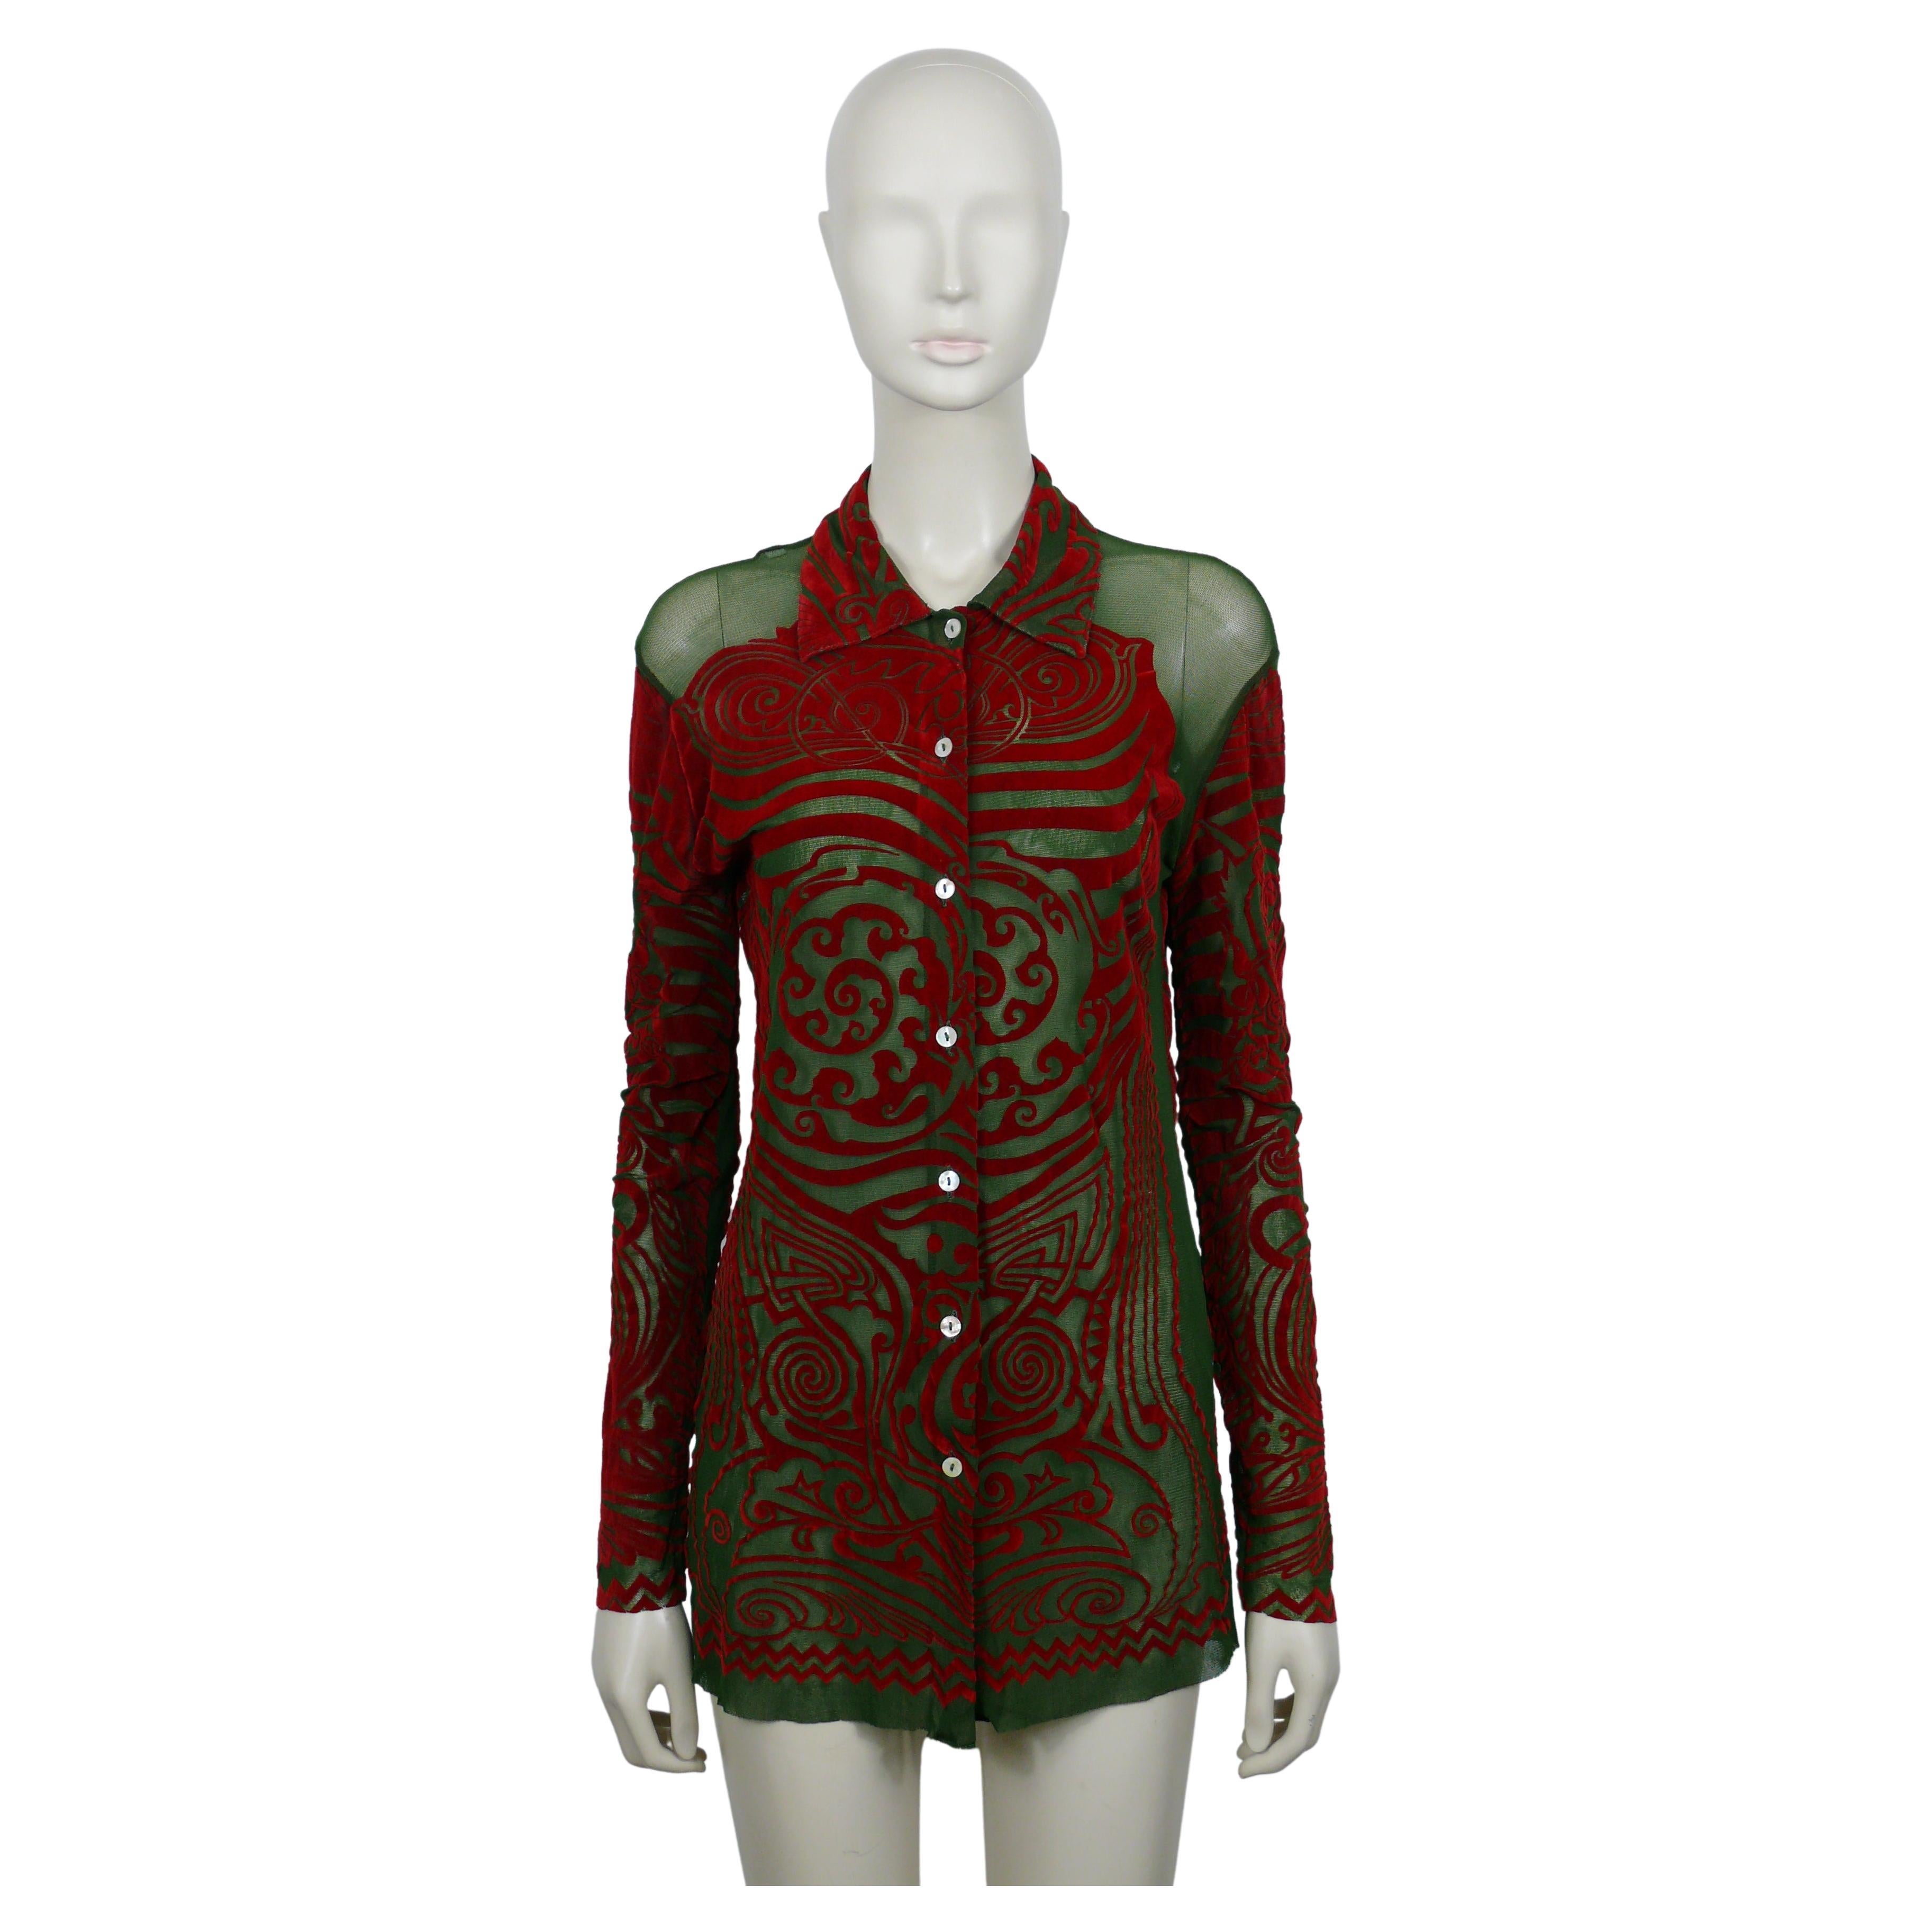 JEAN PAUL GAULTIER Vintage 1996 Iconic Green/Red Tribal Tattoo Mesh Shirt Size L For Sale